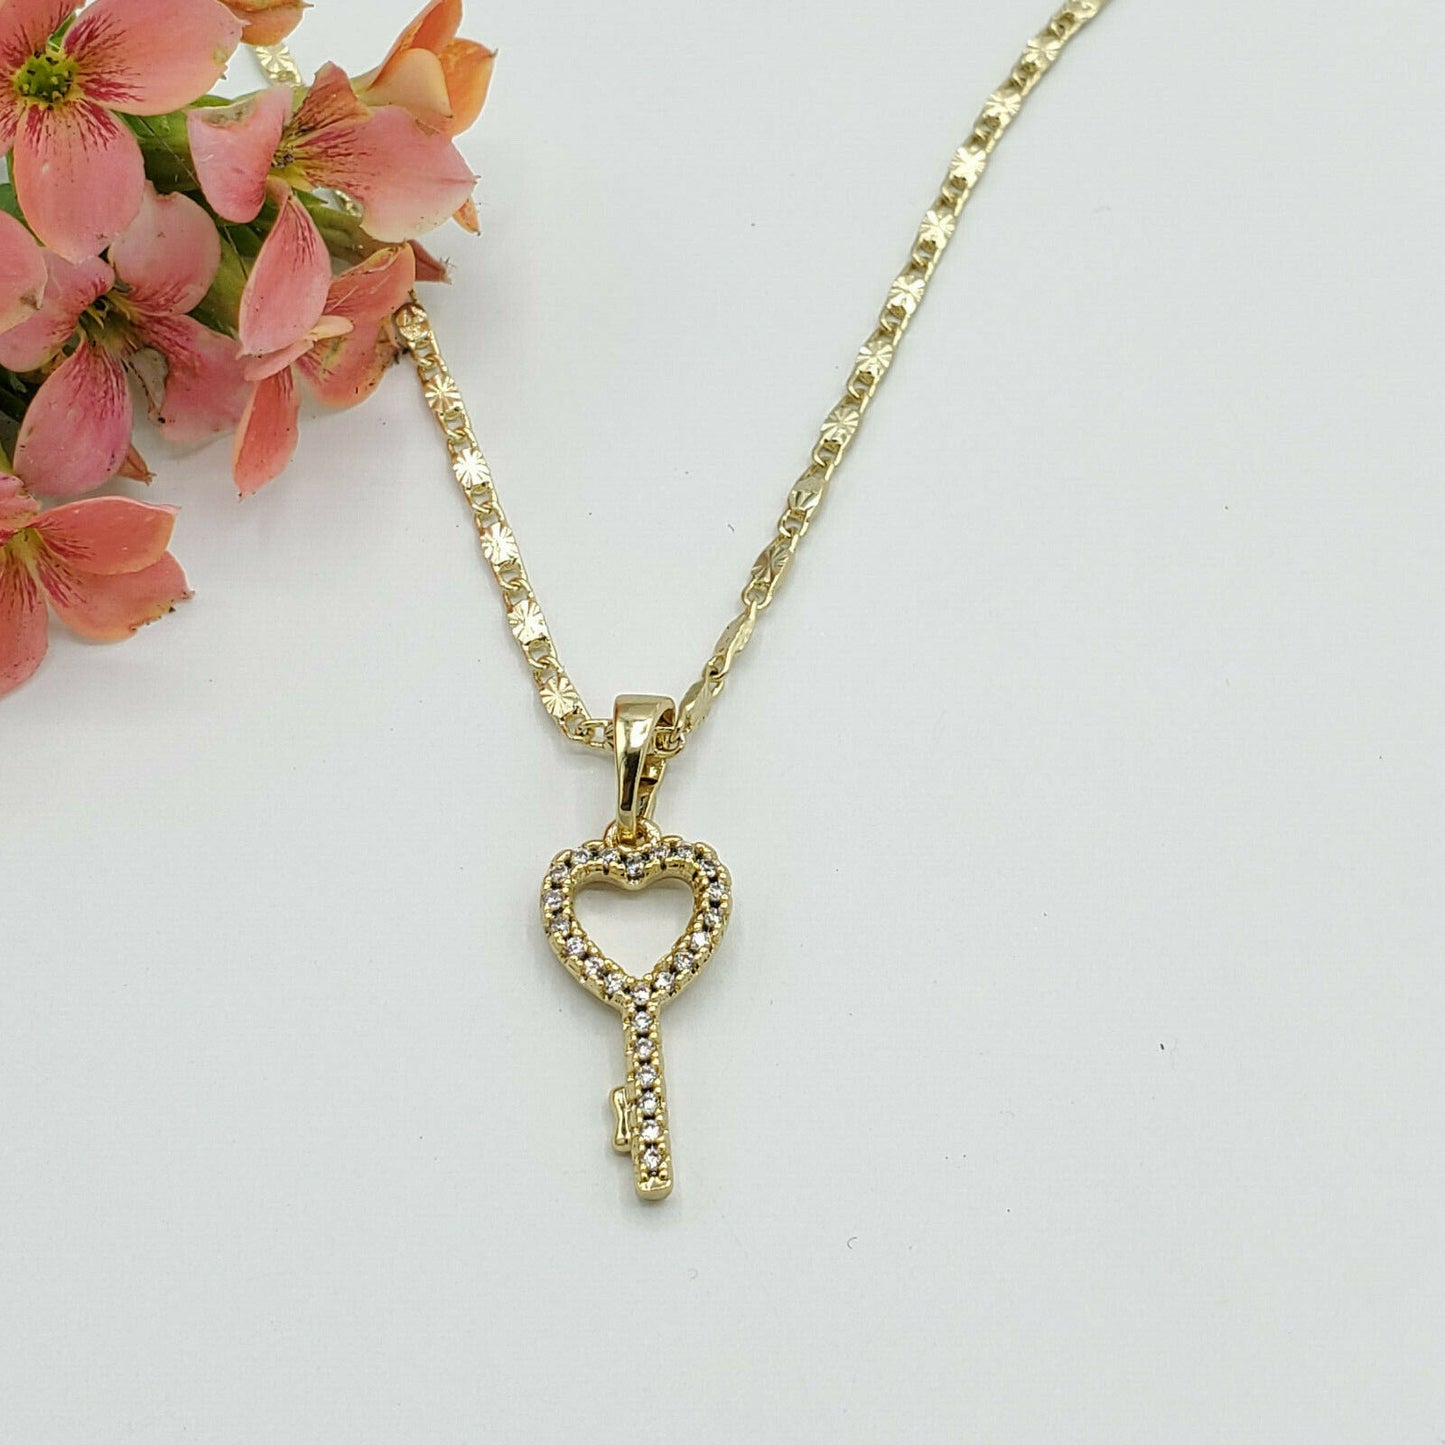 Necklaces - 14K Gold Plated. Love Heart Key Pendant & Chain. 520 Love Gift